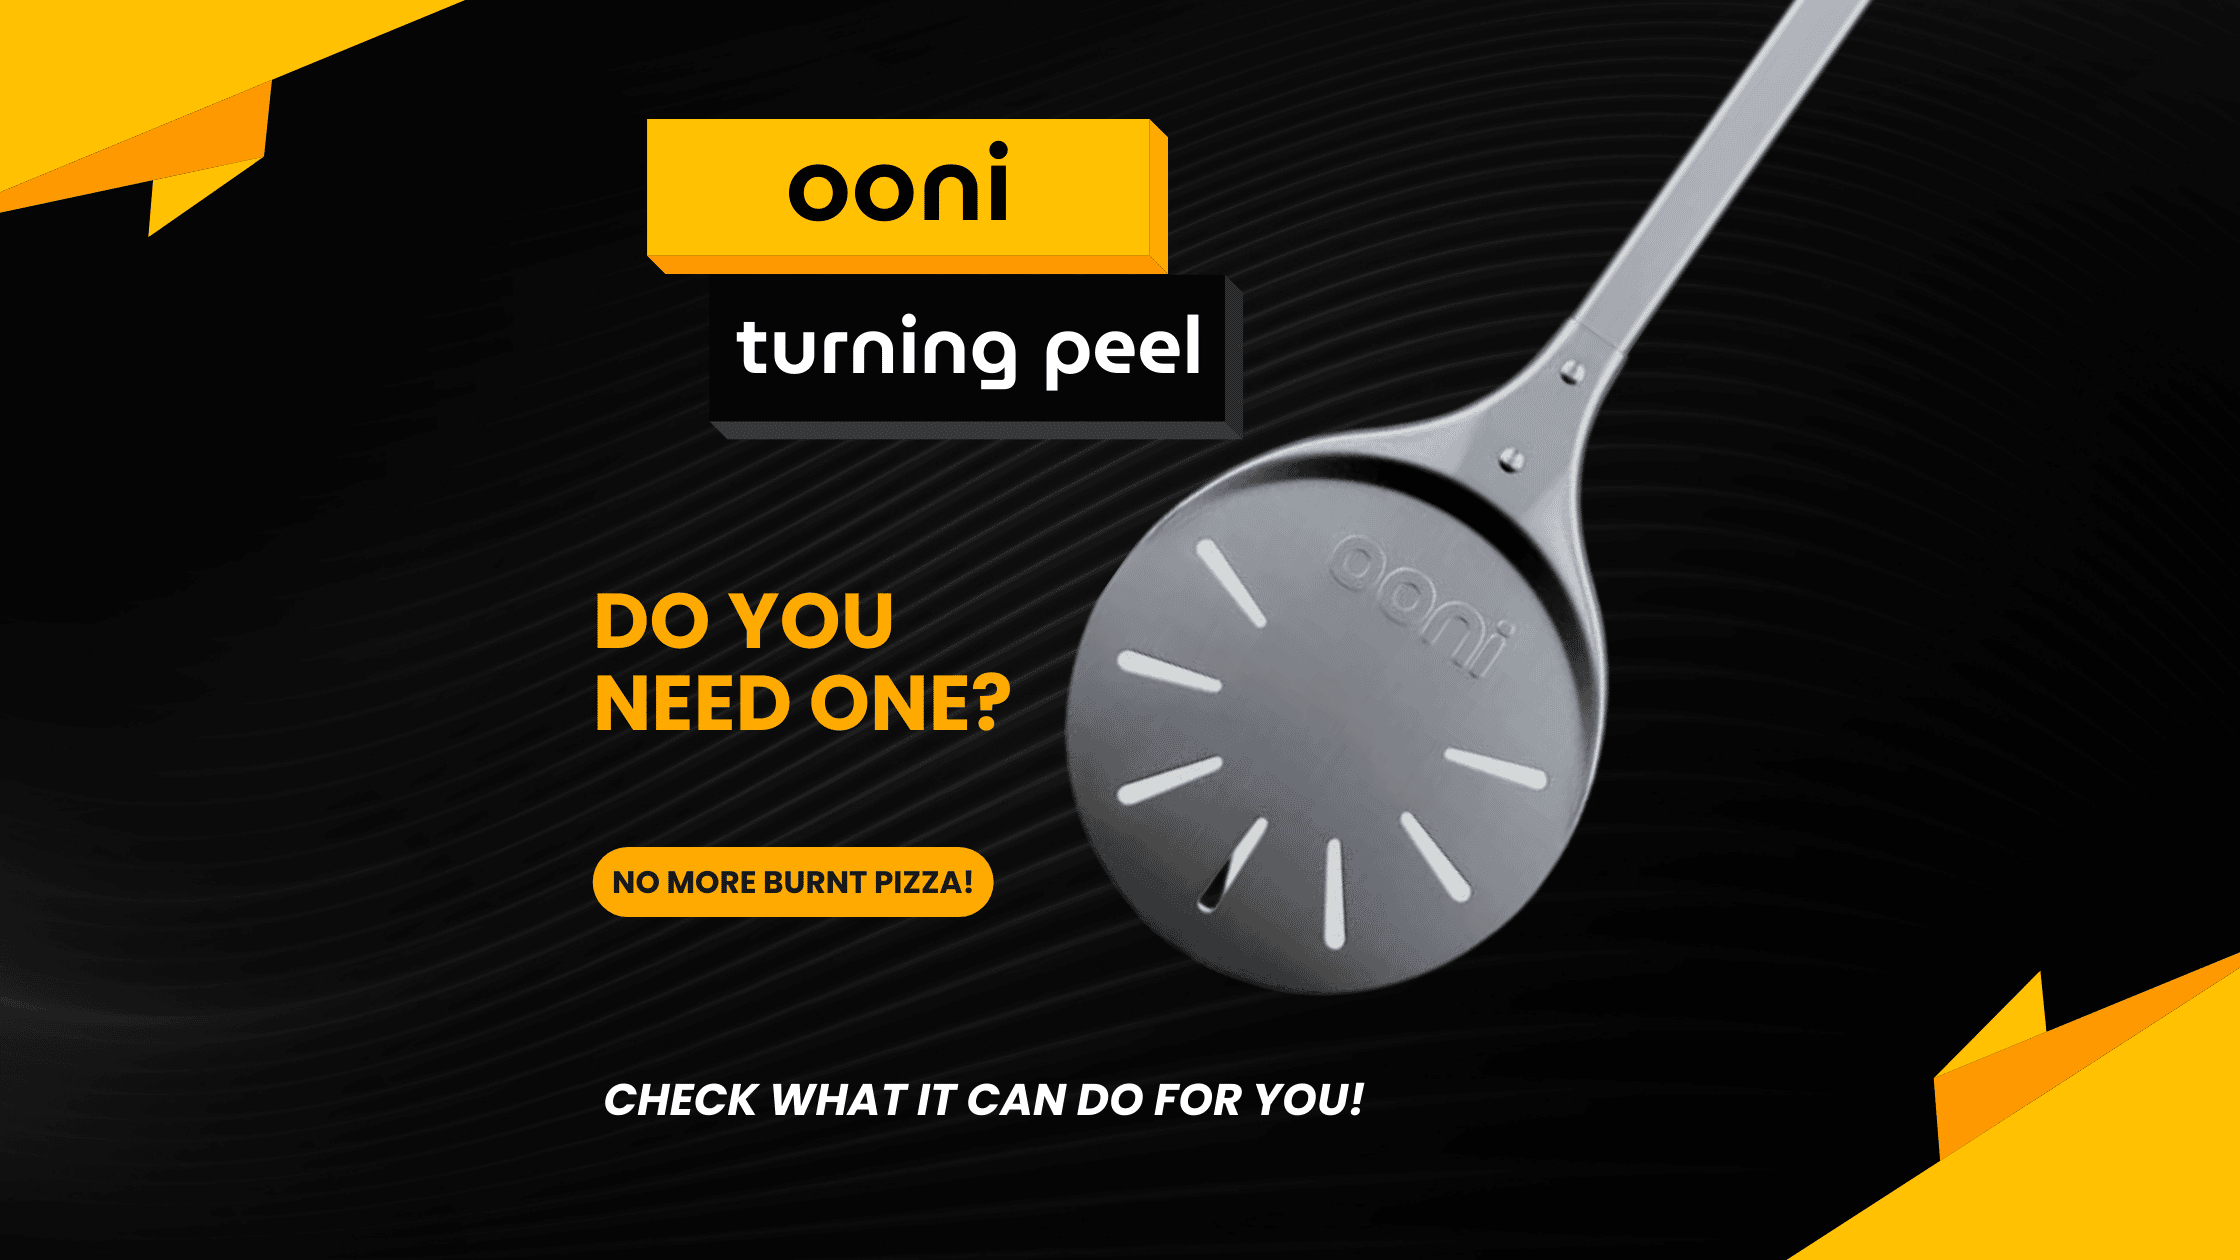 Ooni Turning Peel:  Everything You Need to Know to Master Your Ooni Oven